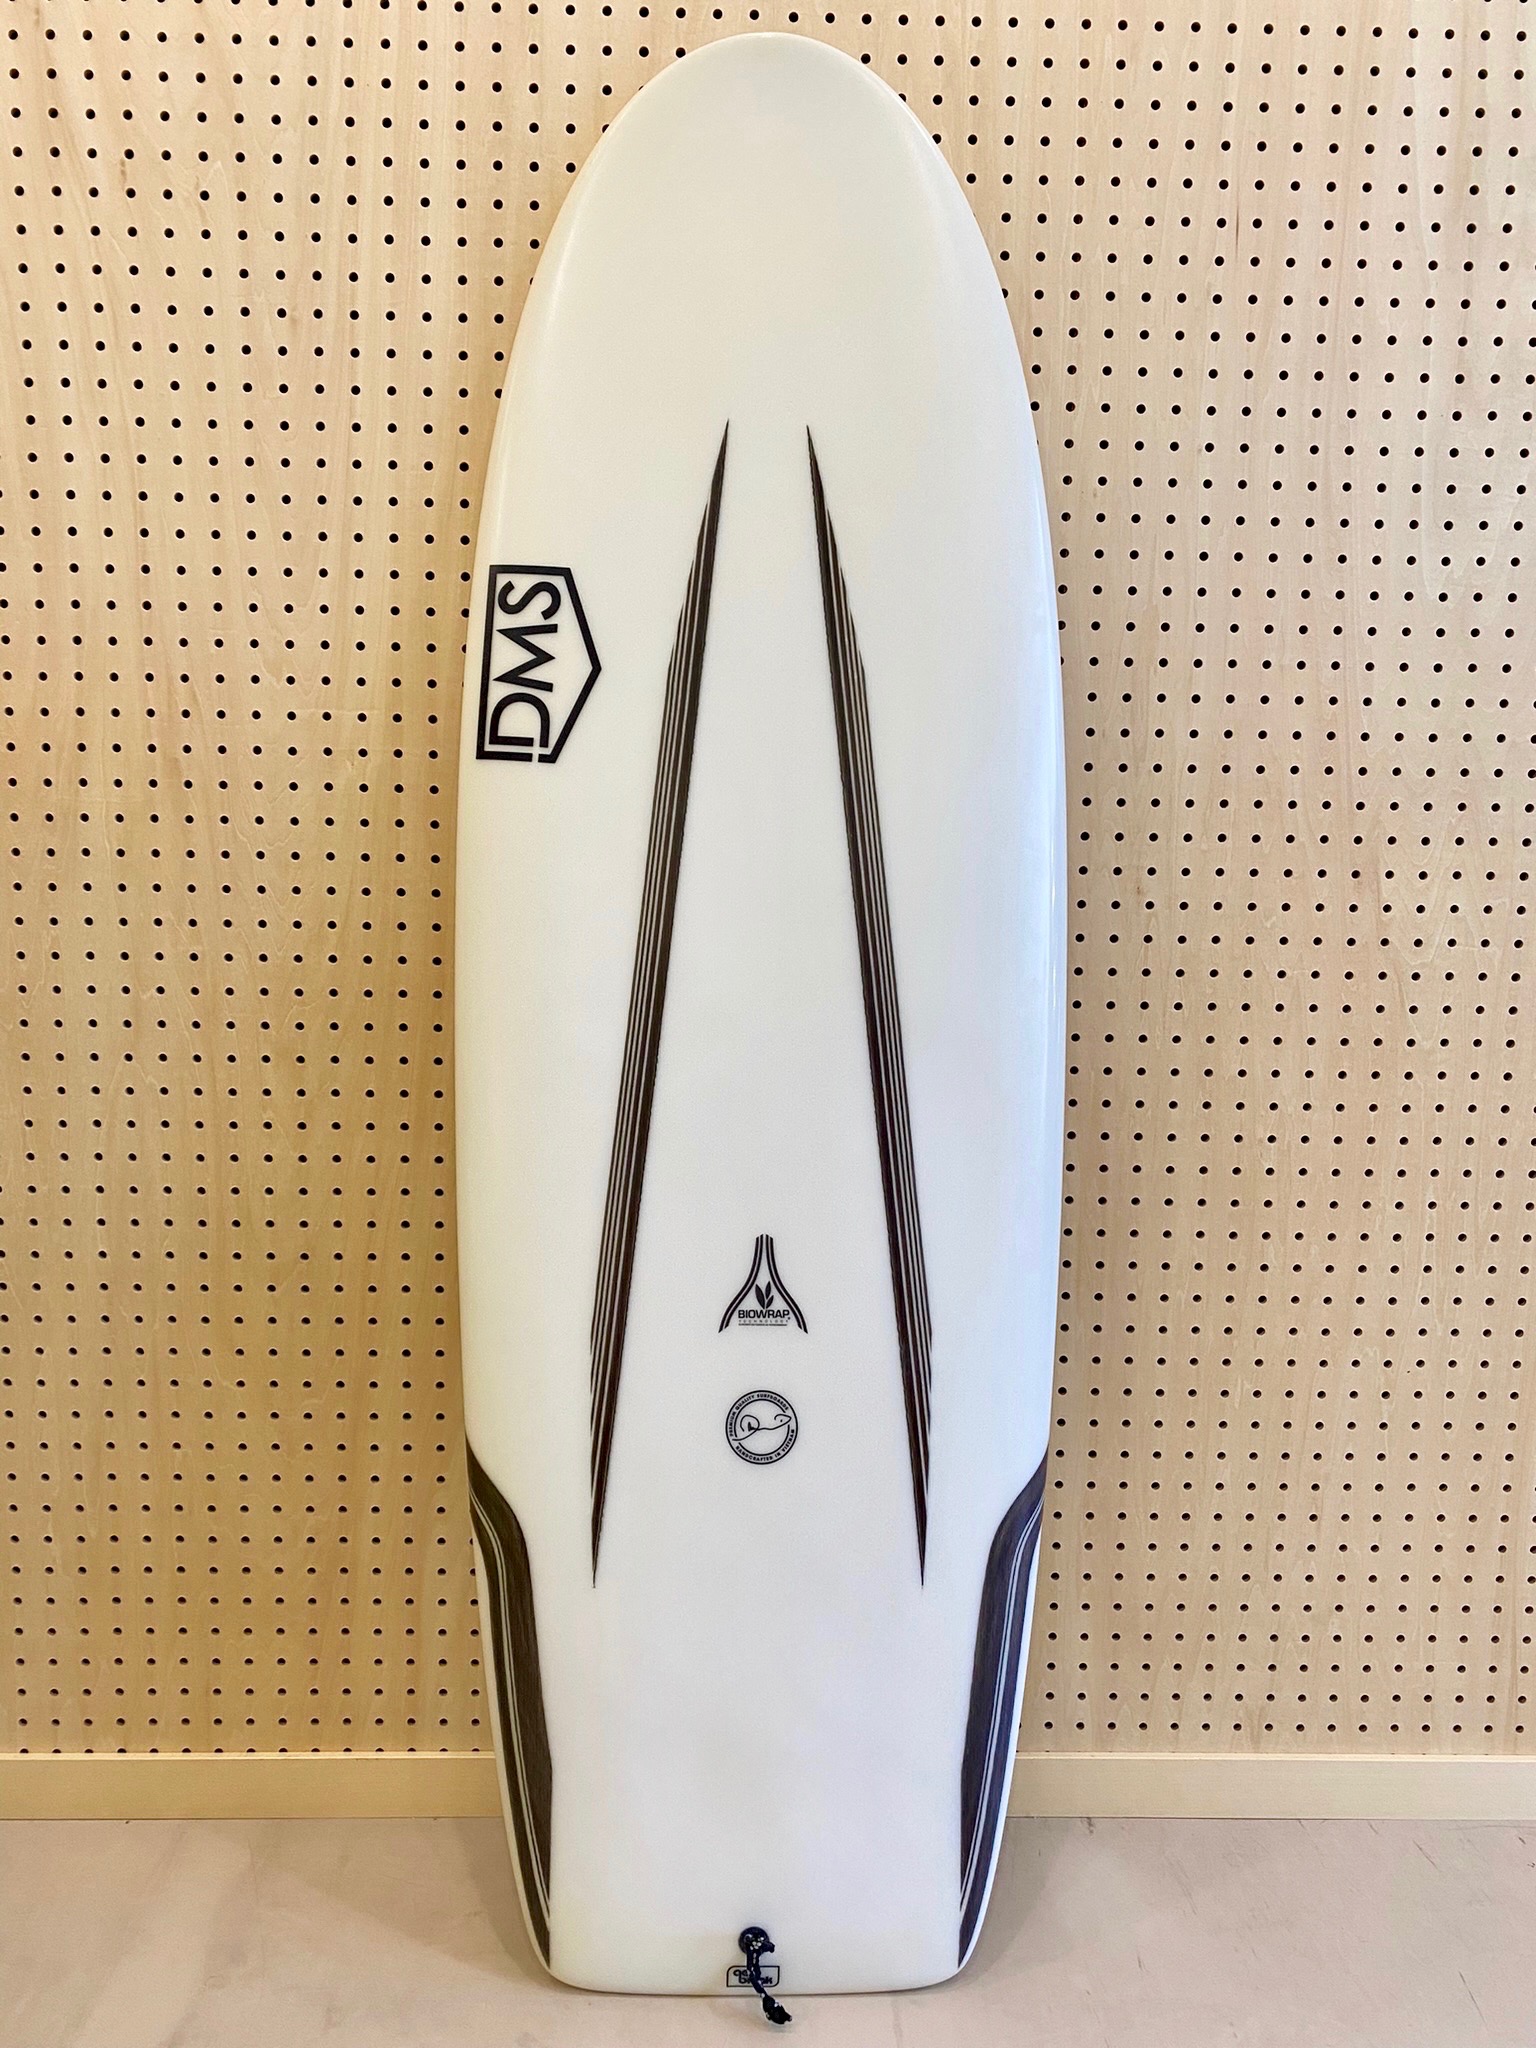 USED BOARDS (DMS Surfboards Valium 5.2)|Okinawa surf shop YES SURF